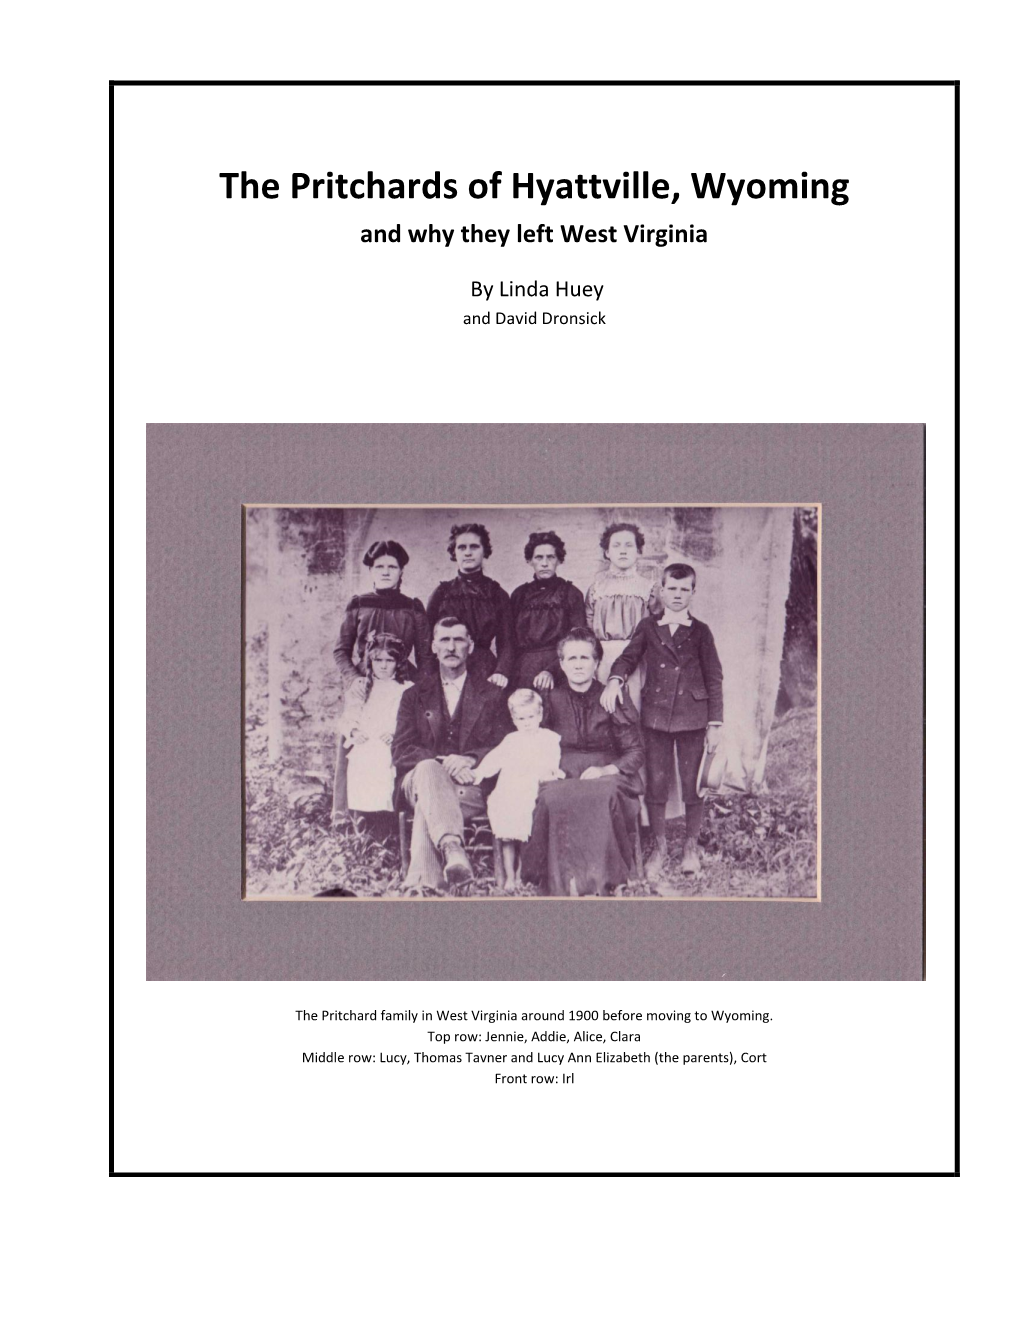 The Pritchards of Hyattville, Wyoming and Why They Left West Virginia